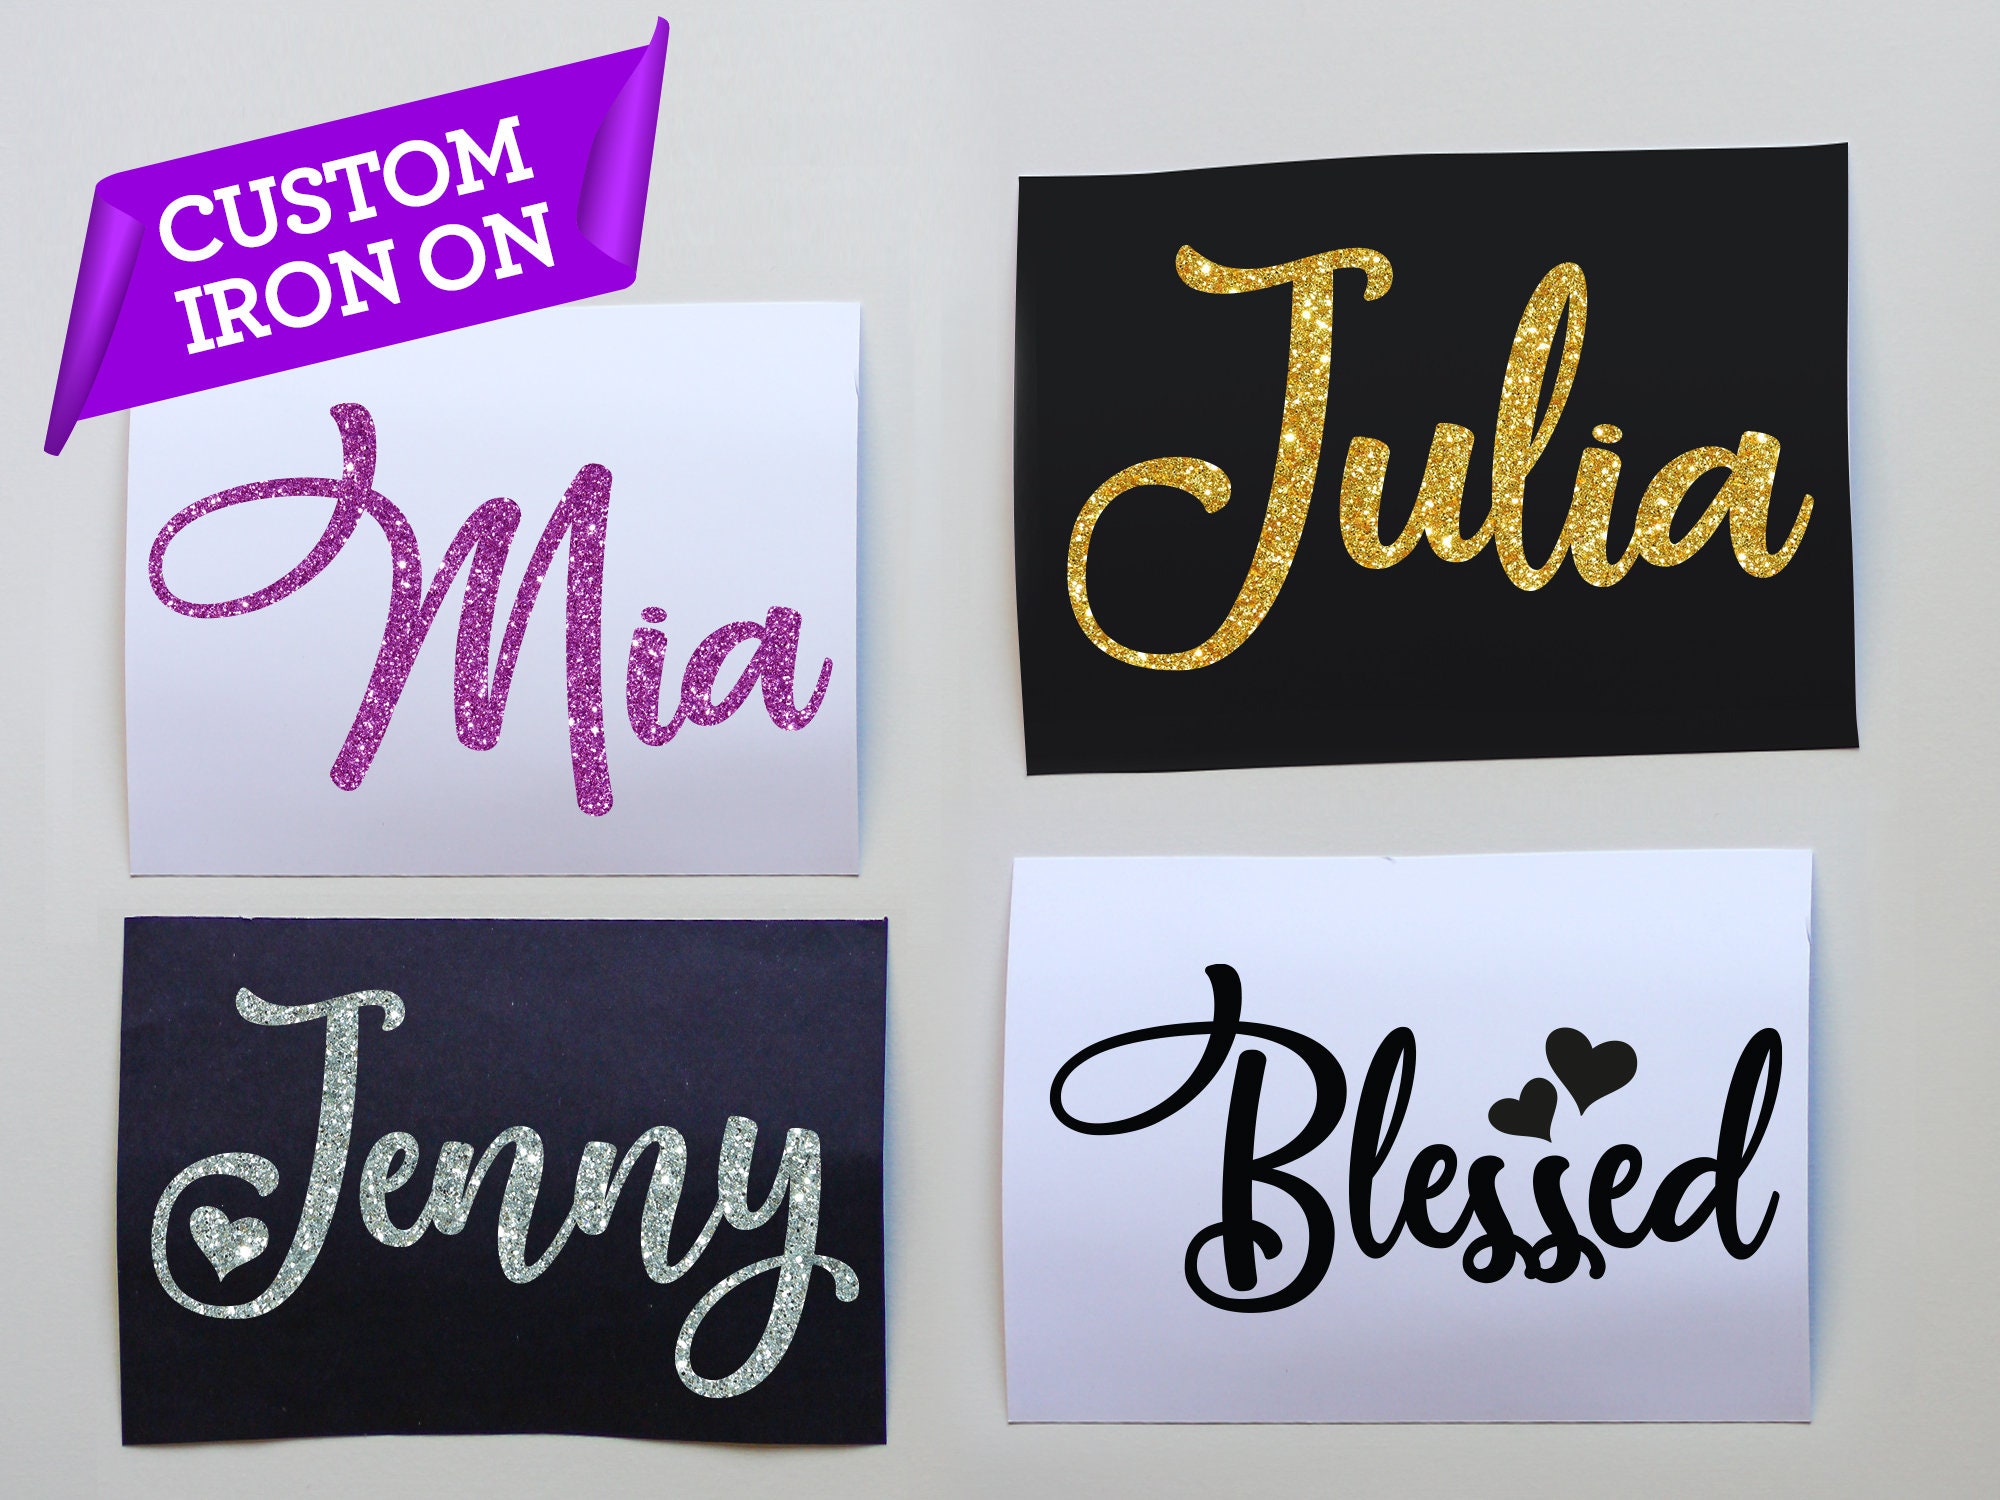 Custom Iron-on Solid-Color Heat Transfer Vinyl Decals for Fabric - YOUR  Design or Logo - Any Shape, Text, Design - Single Color